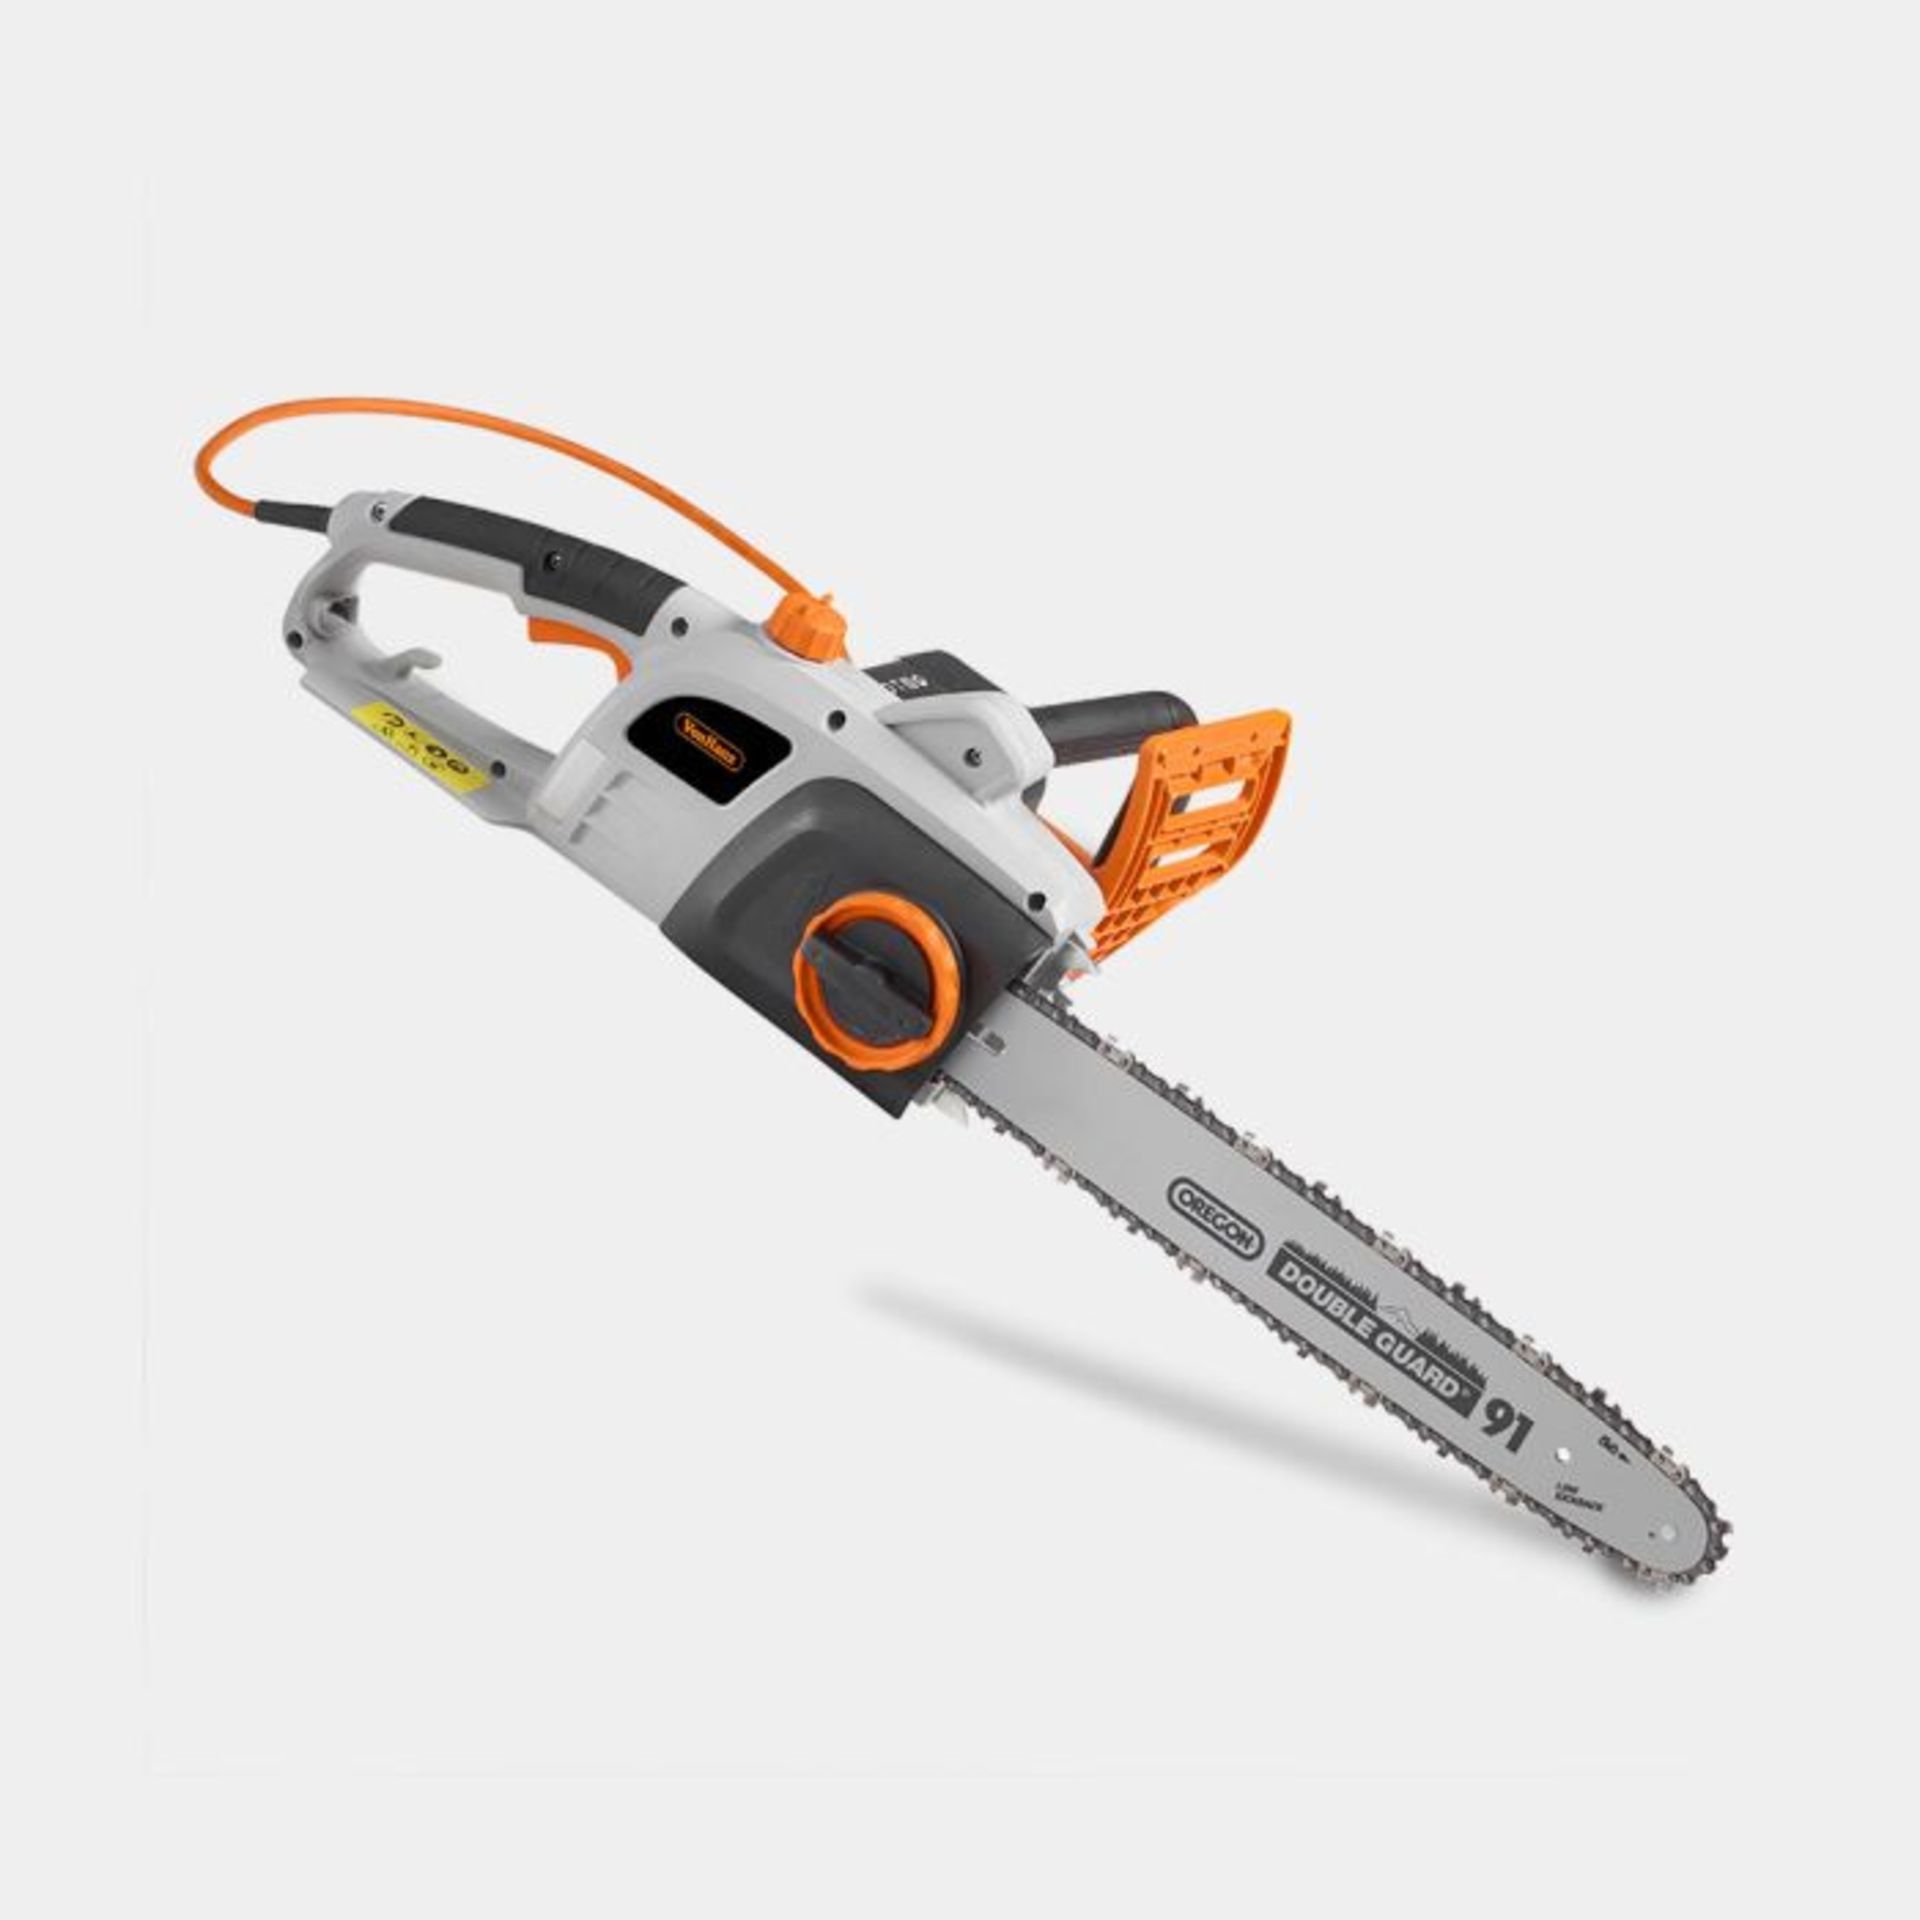 2200W Chainsaw. This 2200W motor chainsaw benefits from a 40.5cm cutting length, so you can take